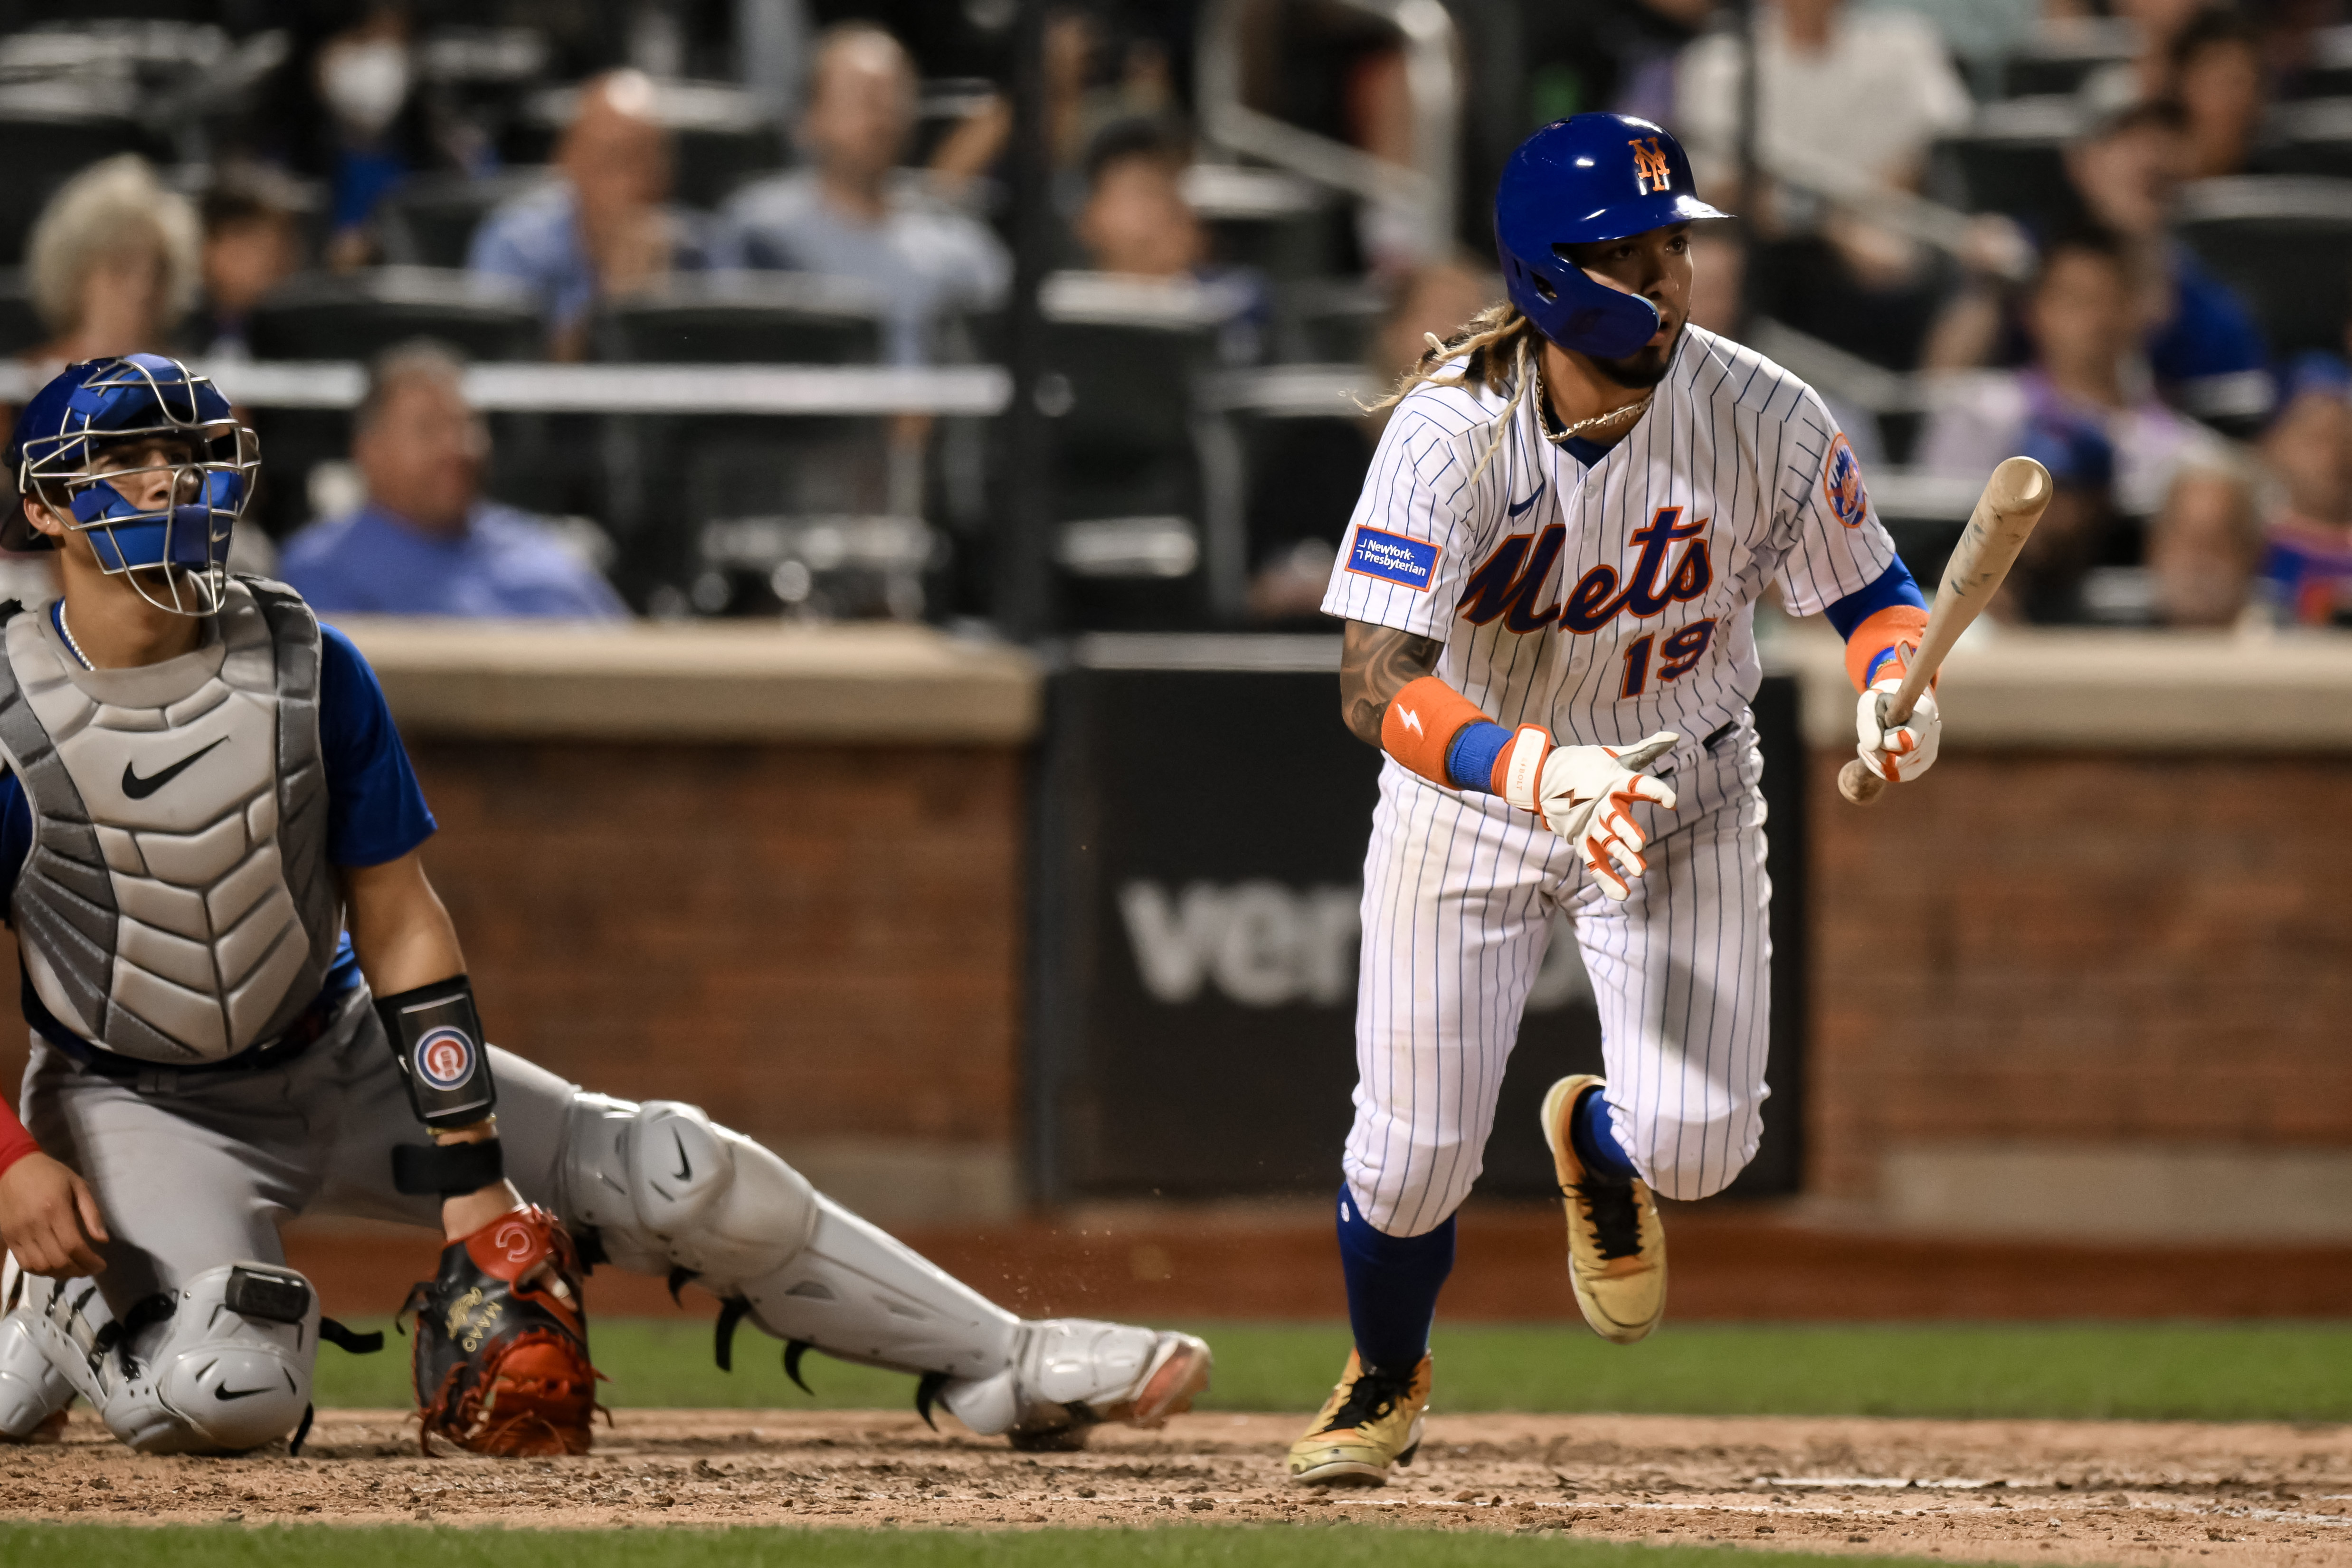 Surging Cubs beat the Mets 3-2 at Citi Field